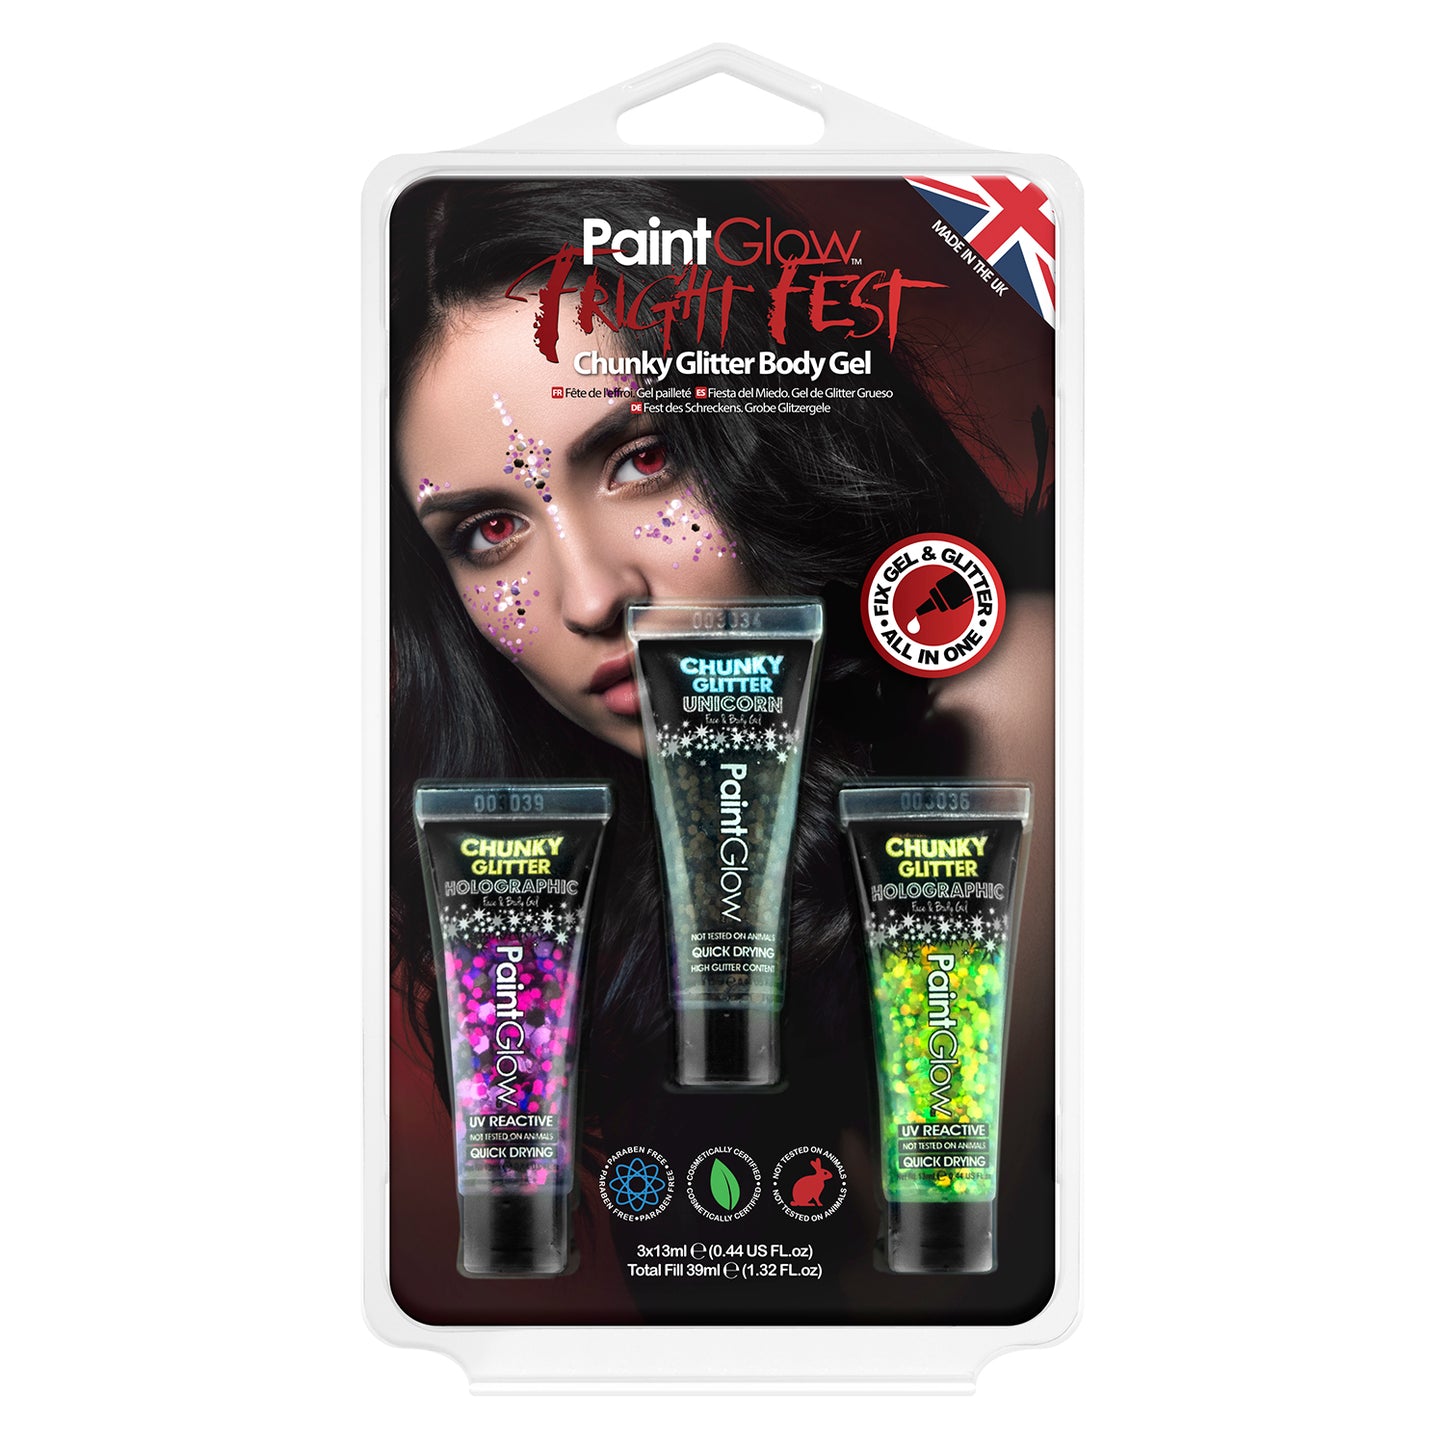 PaintGlow Fright Fest Chunky Glitter Face and Body Gels